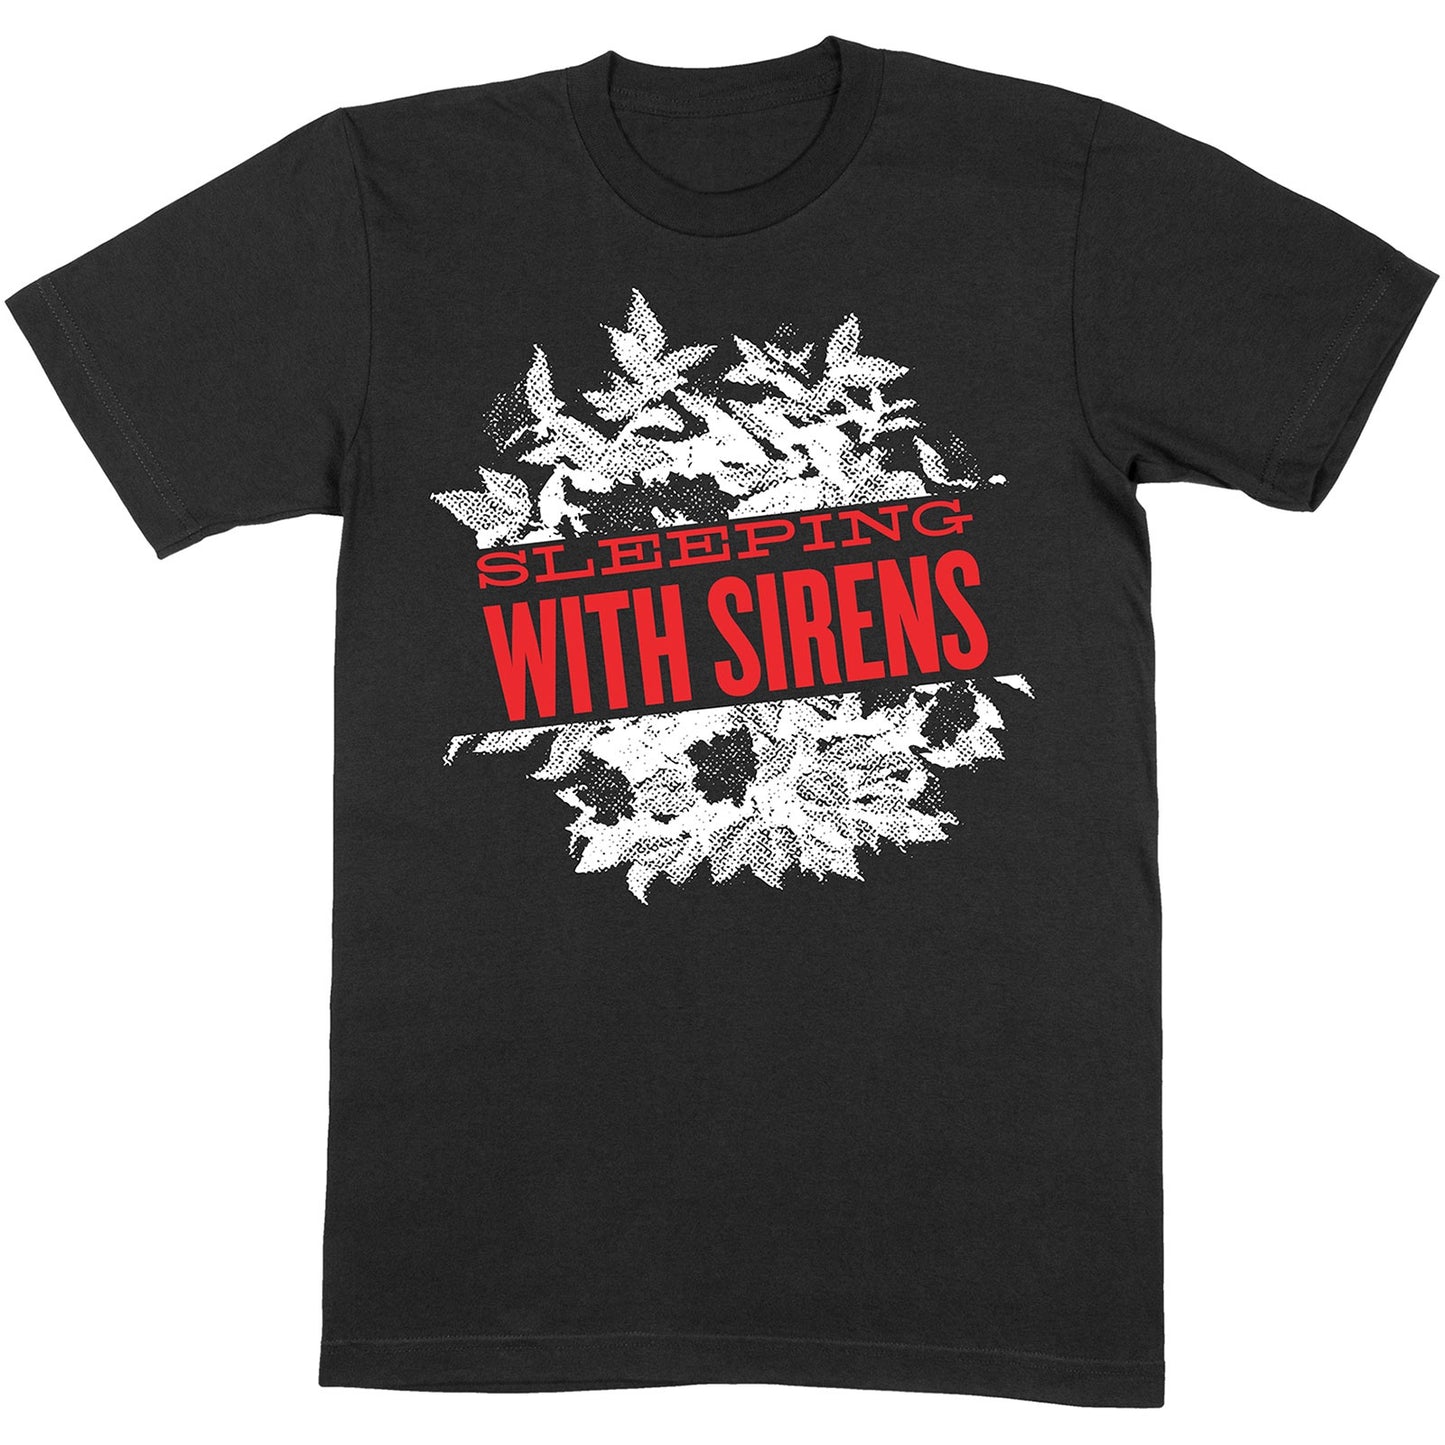 SLEEPING WITH SIRENS - Floral T-Shirt